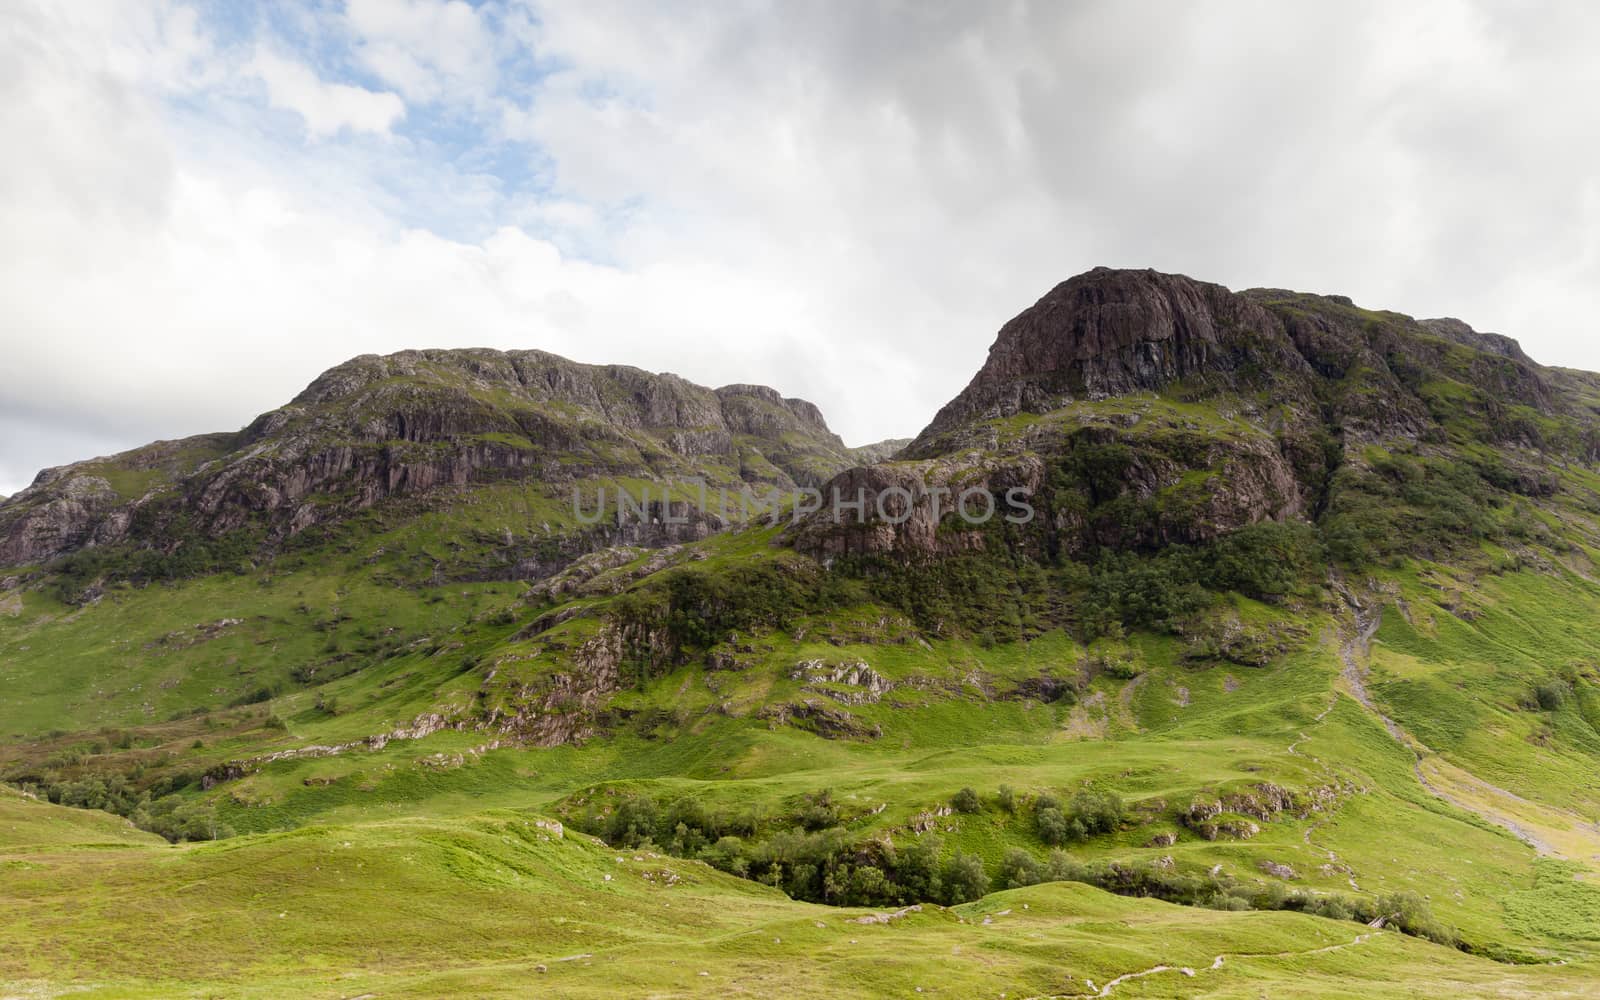 A view of the Glencoe hillside in the Scottish highlands.  Glencoe is the most famous of all the Scottish glens.